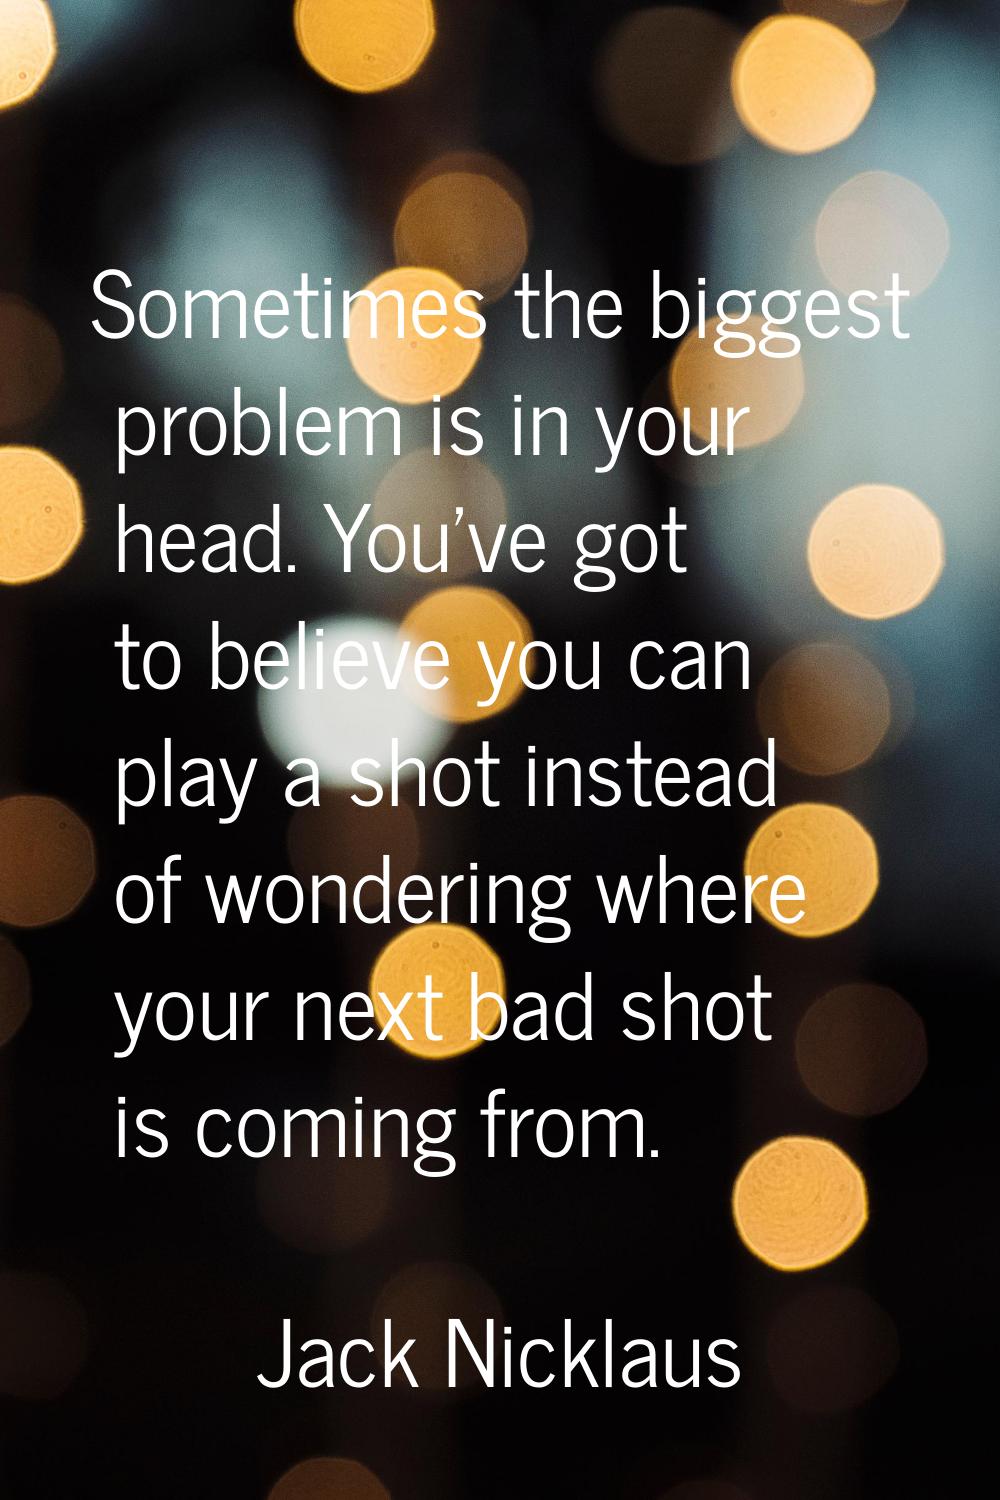 Sometimes the biggest problem is in your head. You've got to believe you can play a shot instead of